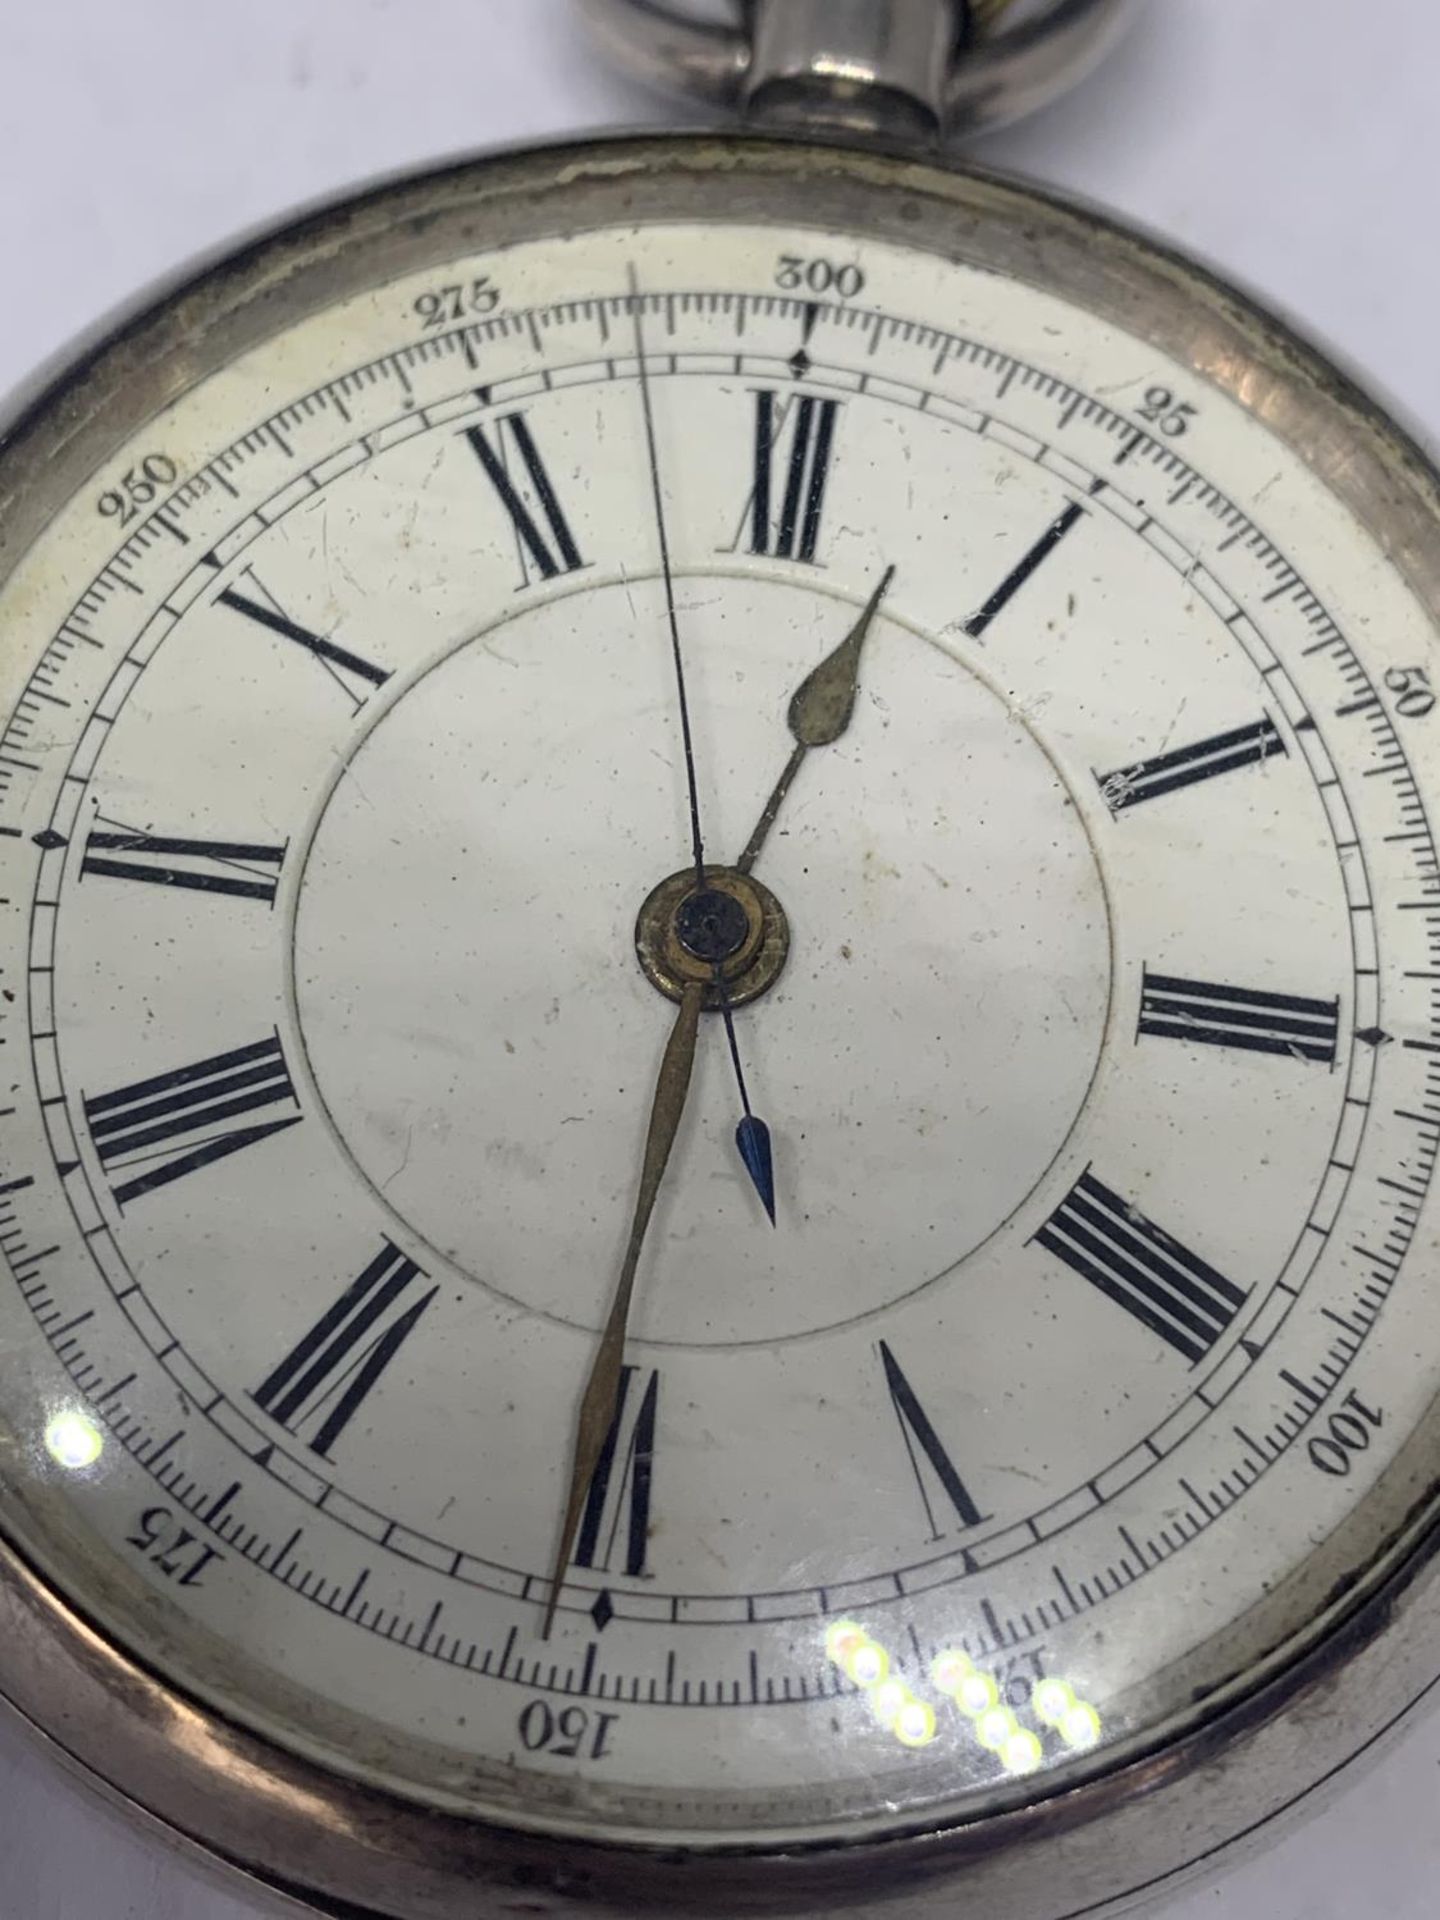 AN ANTIQUE .935 SILVER CHRONOMETRE POCKET WATCH - Image 2 of 5